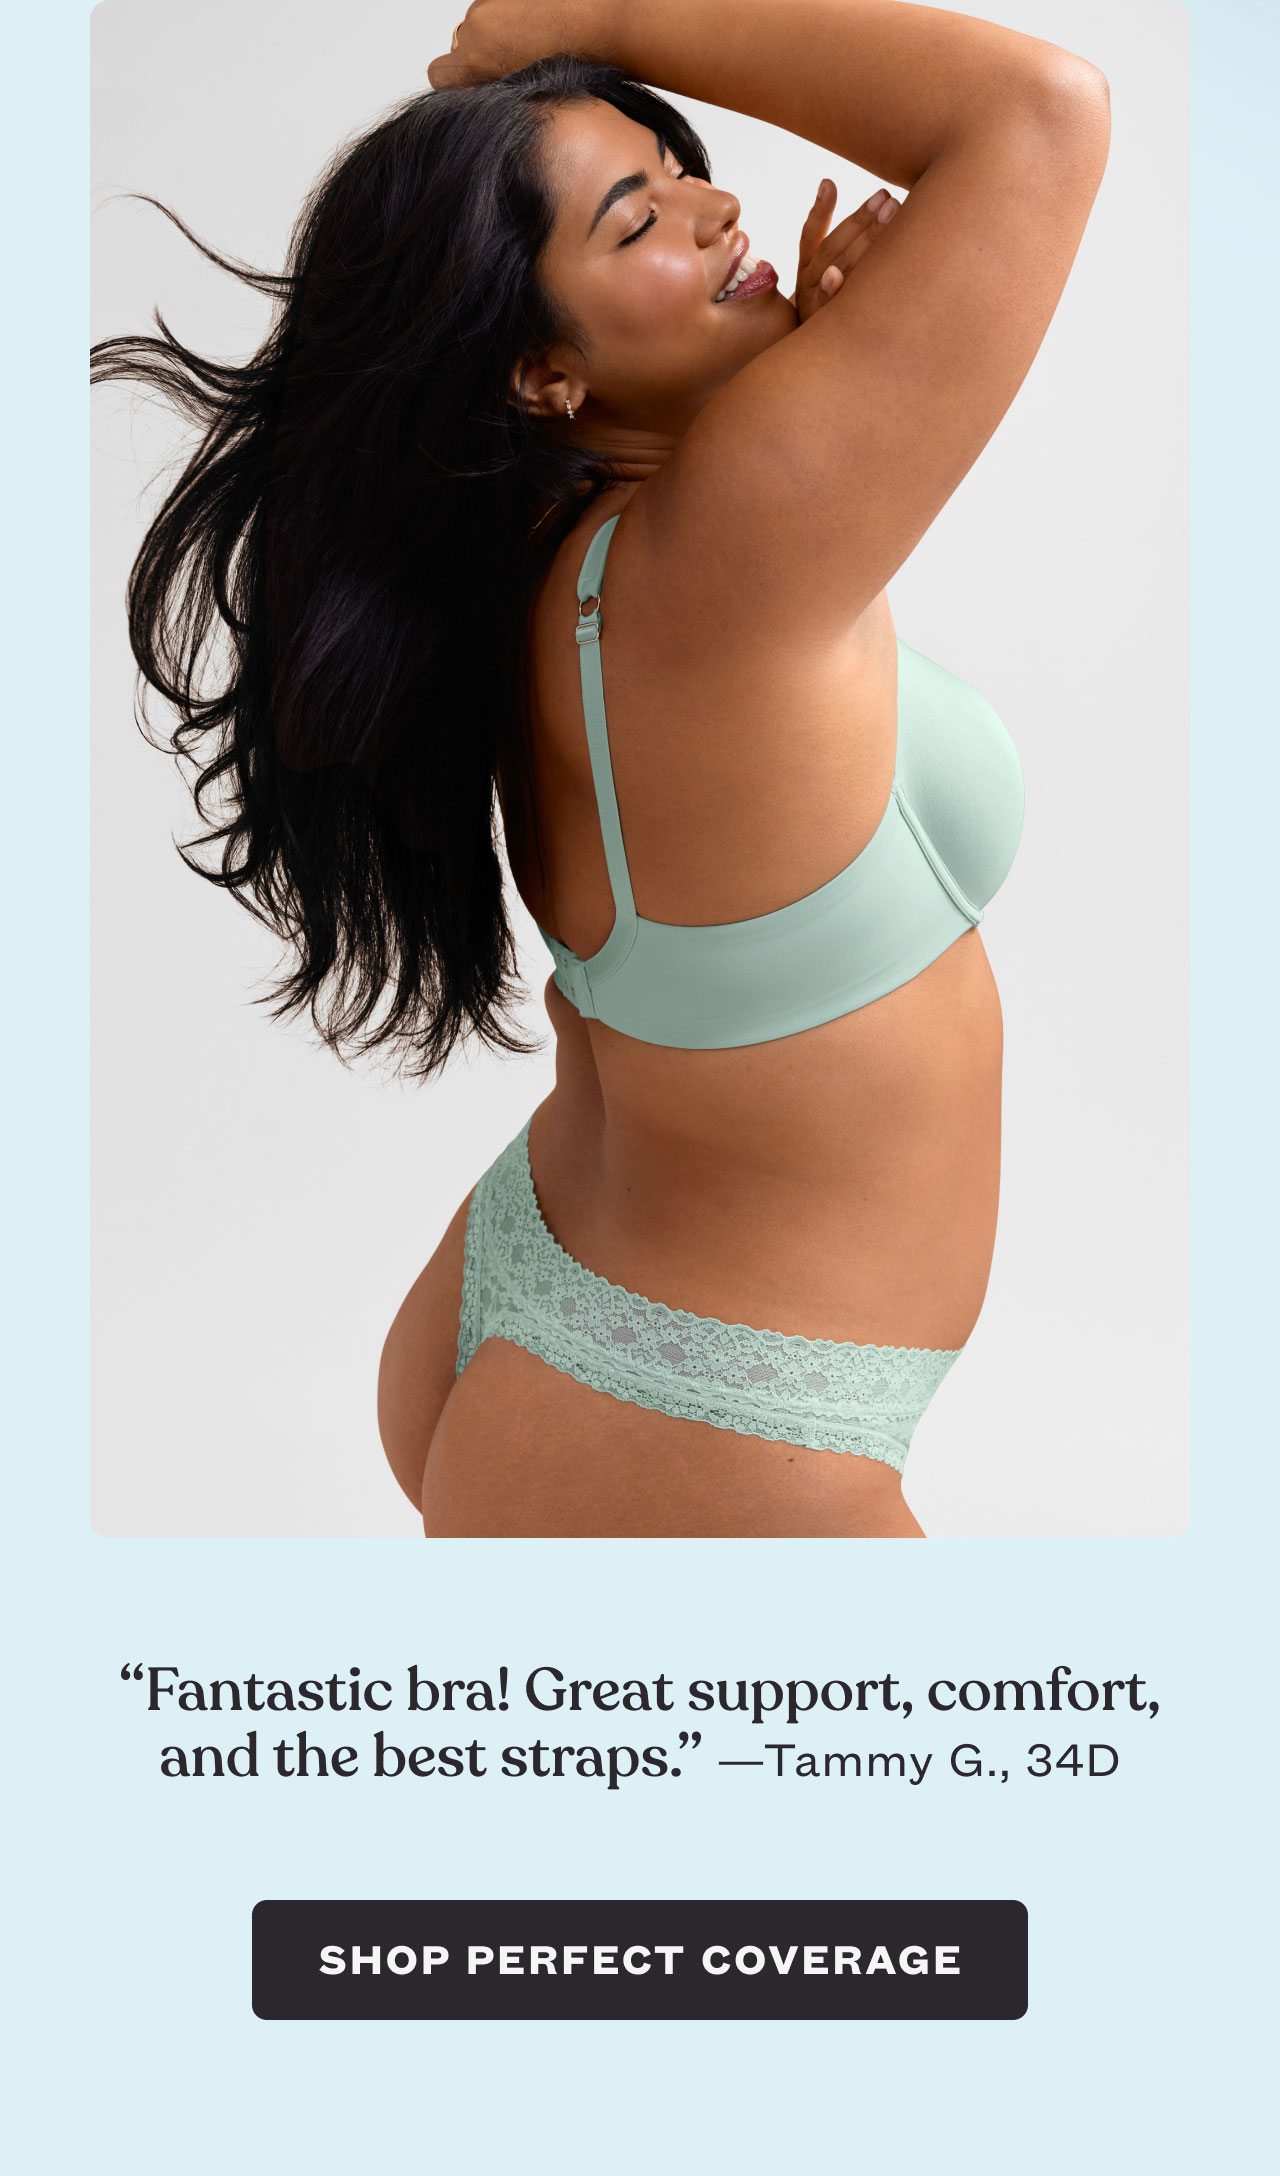 “Fantastic bra! Great support, comfort, and the best straps.” —Tammy G., 34D - Shop Perfect Coverage